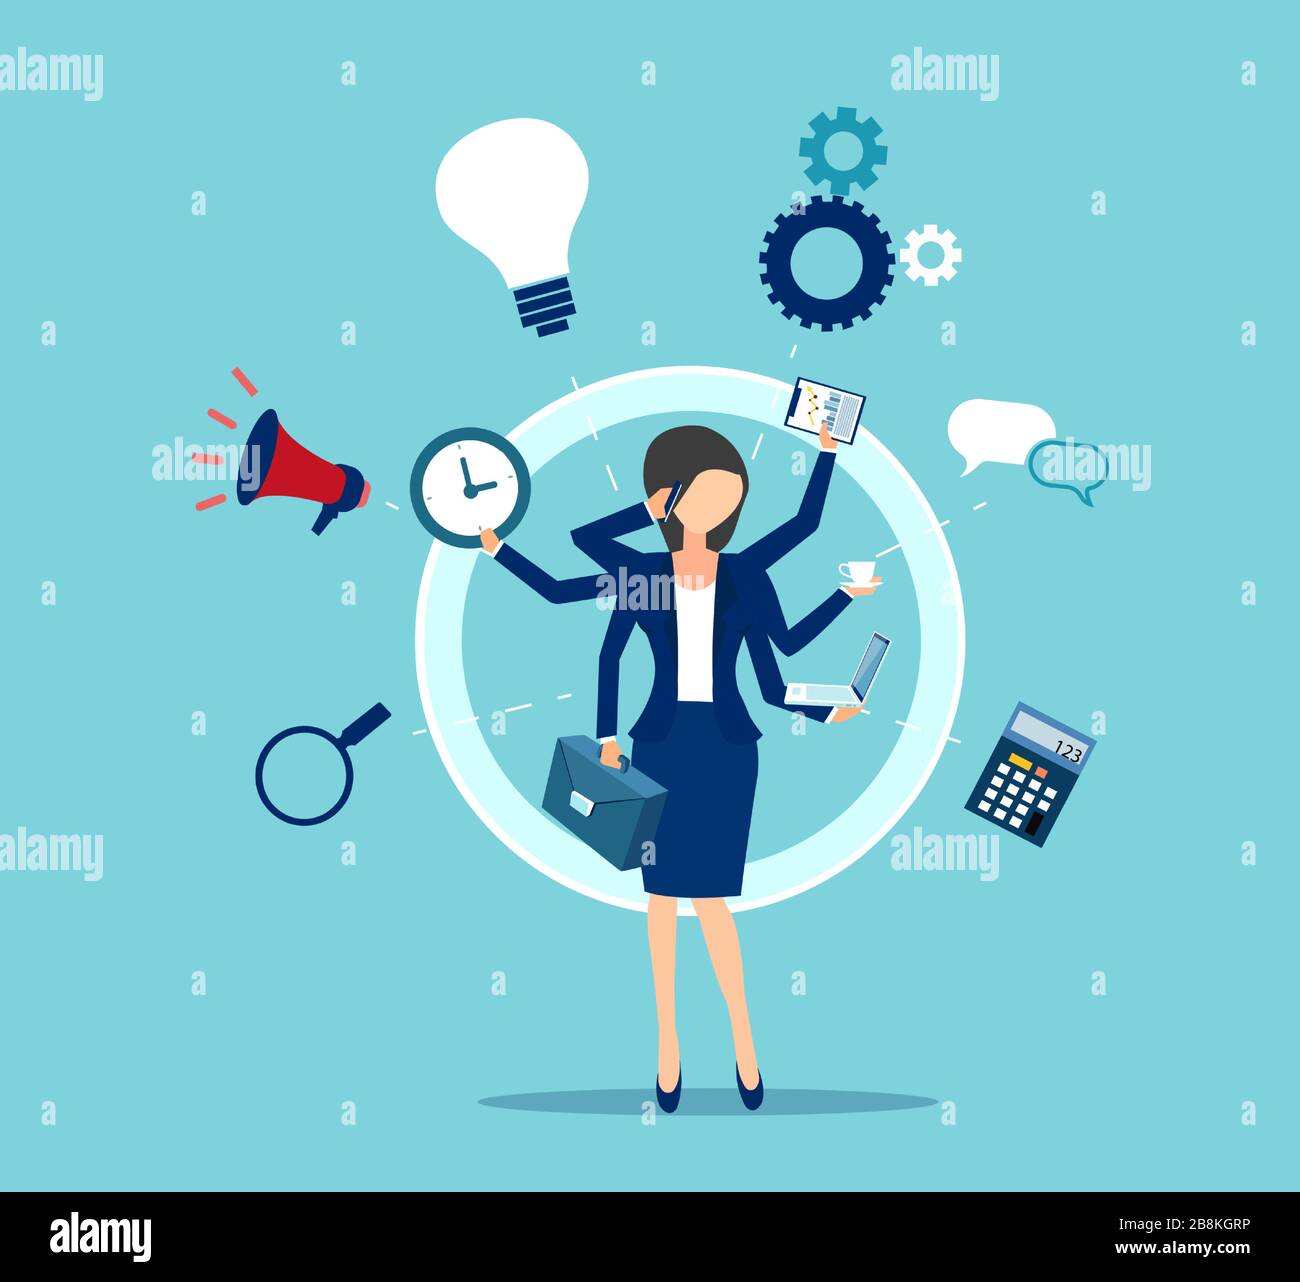 Vector of a multitasking business woman with many hands performing several tasks at the same time. Stock Vector